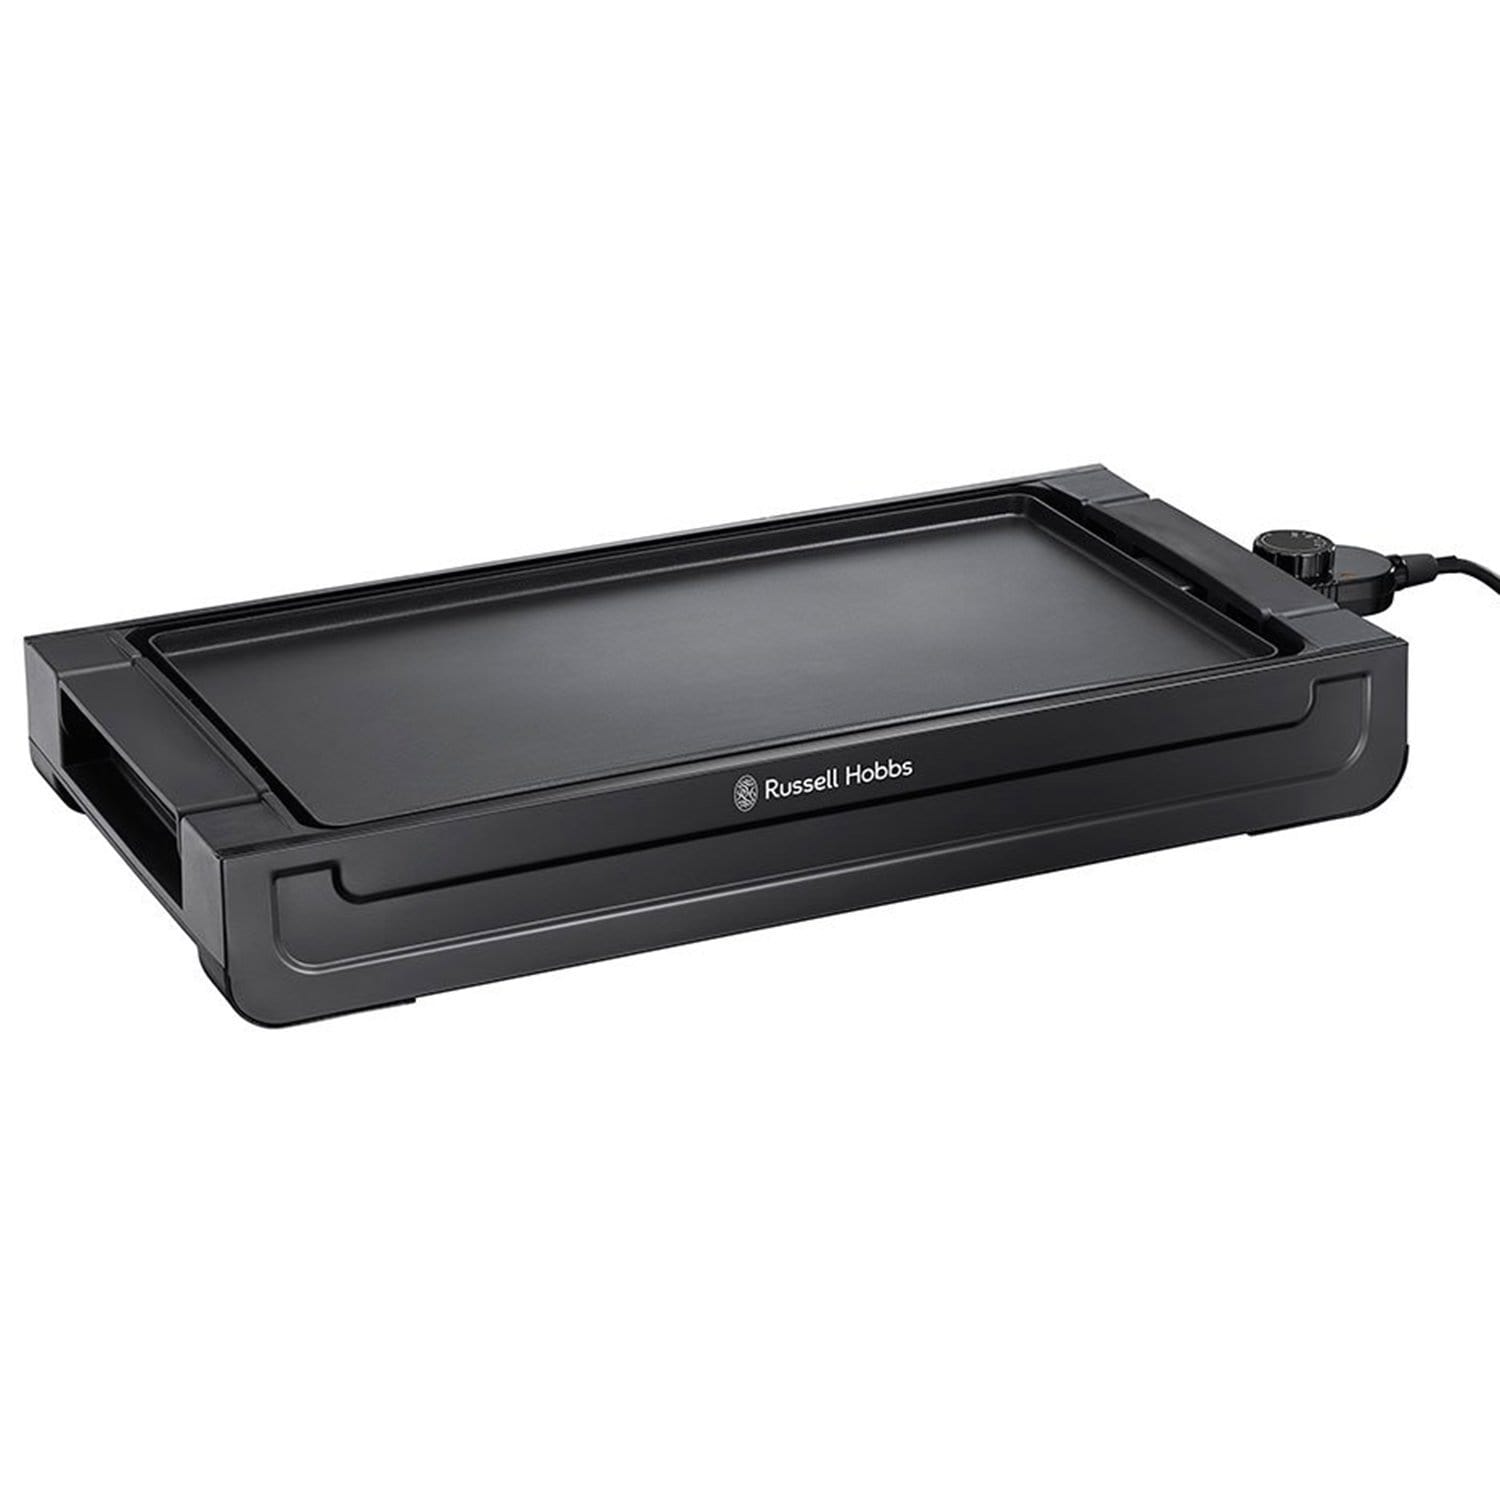 Russell Hobbs Griddle with Removable Plate - 22550 - Jashanmal Home